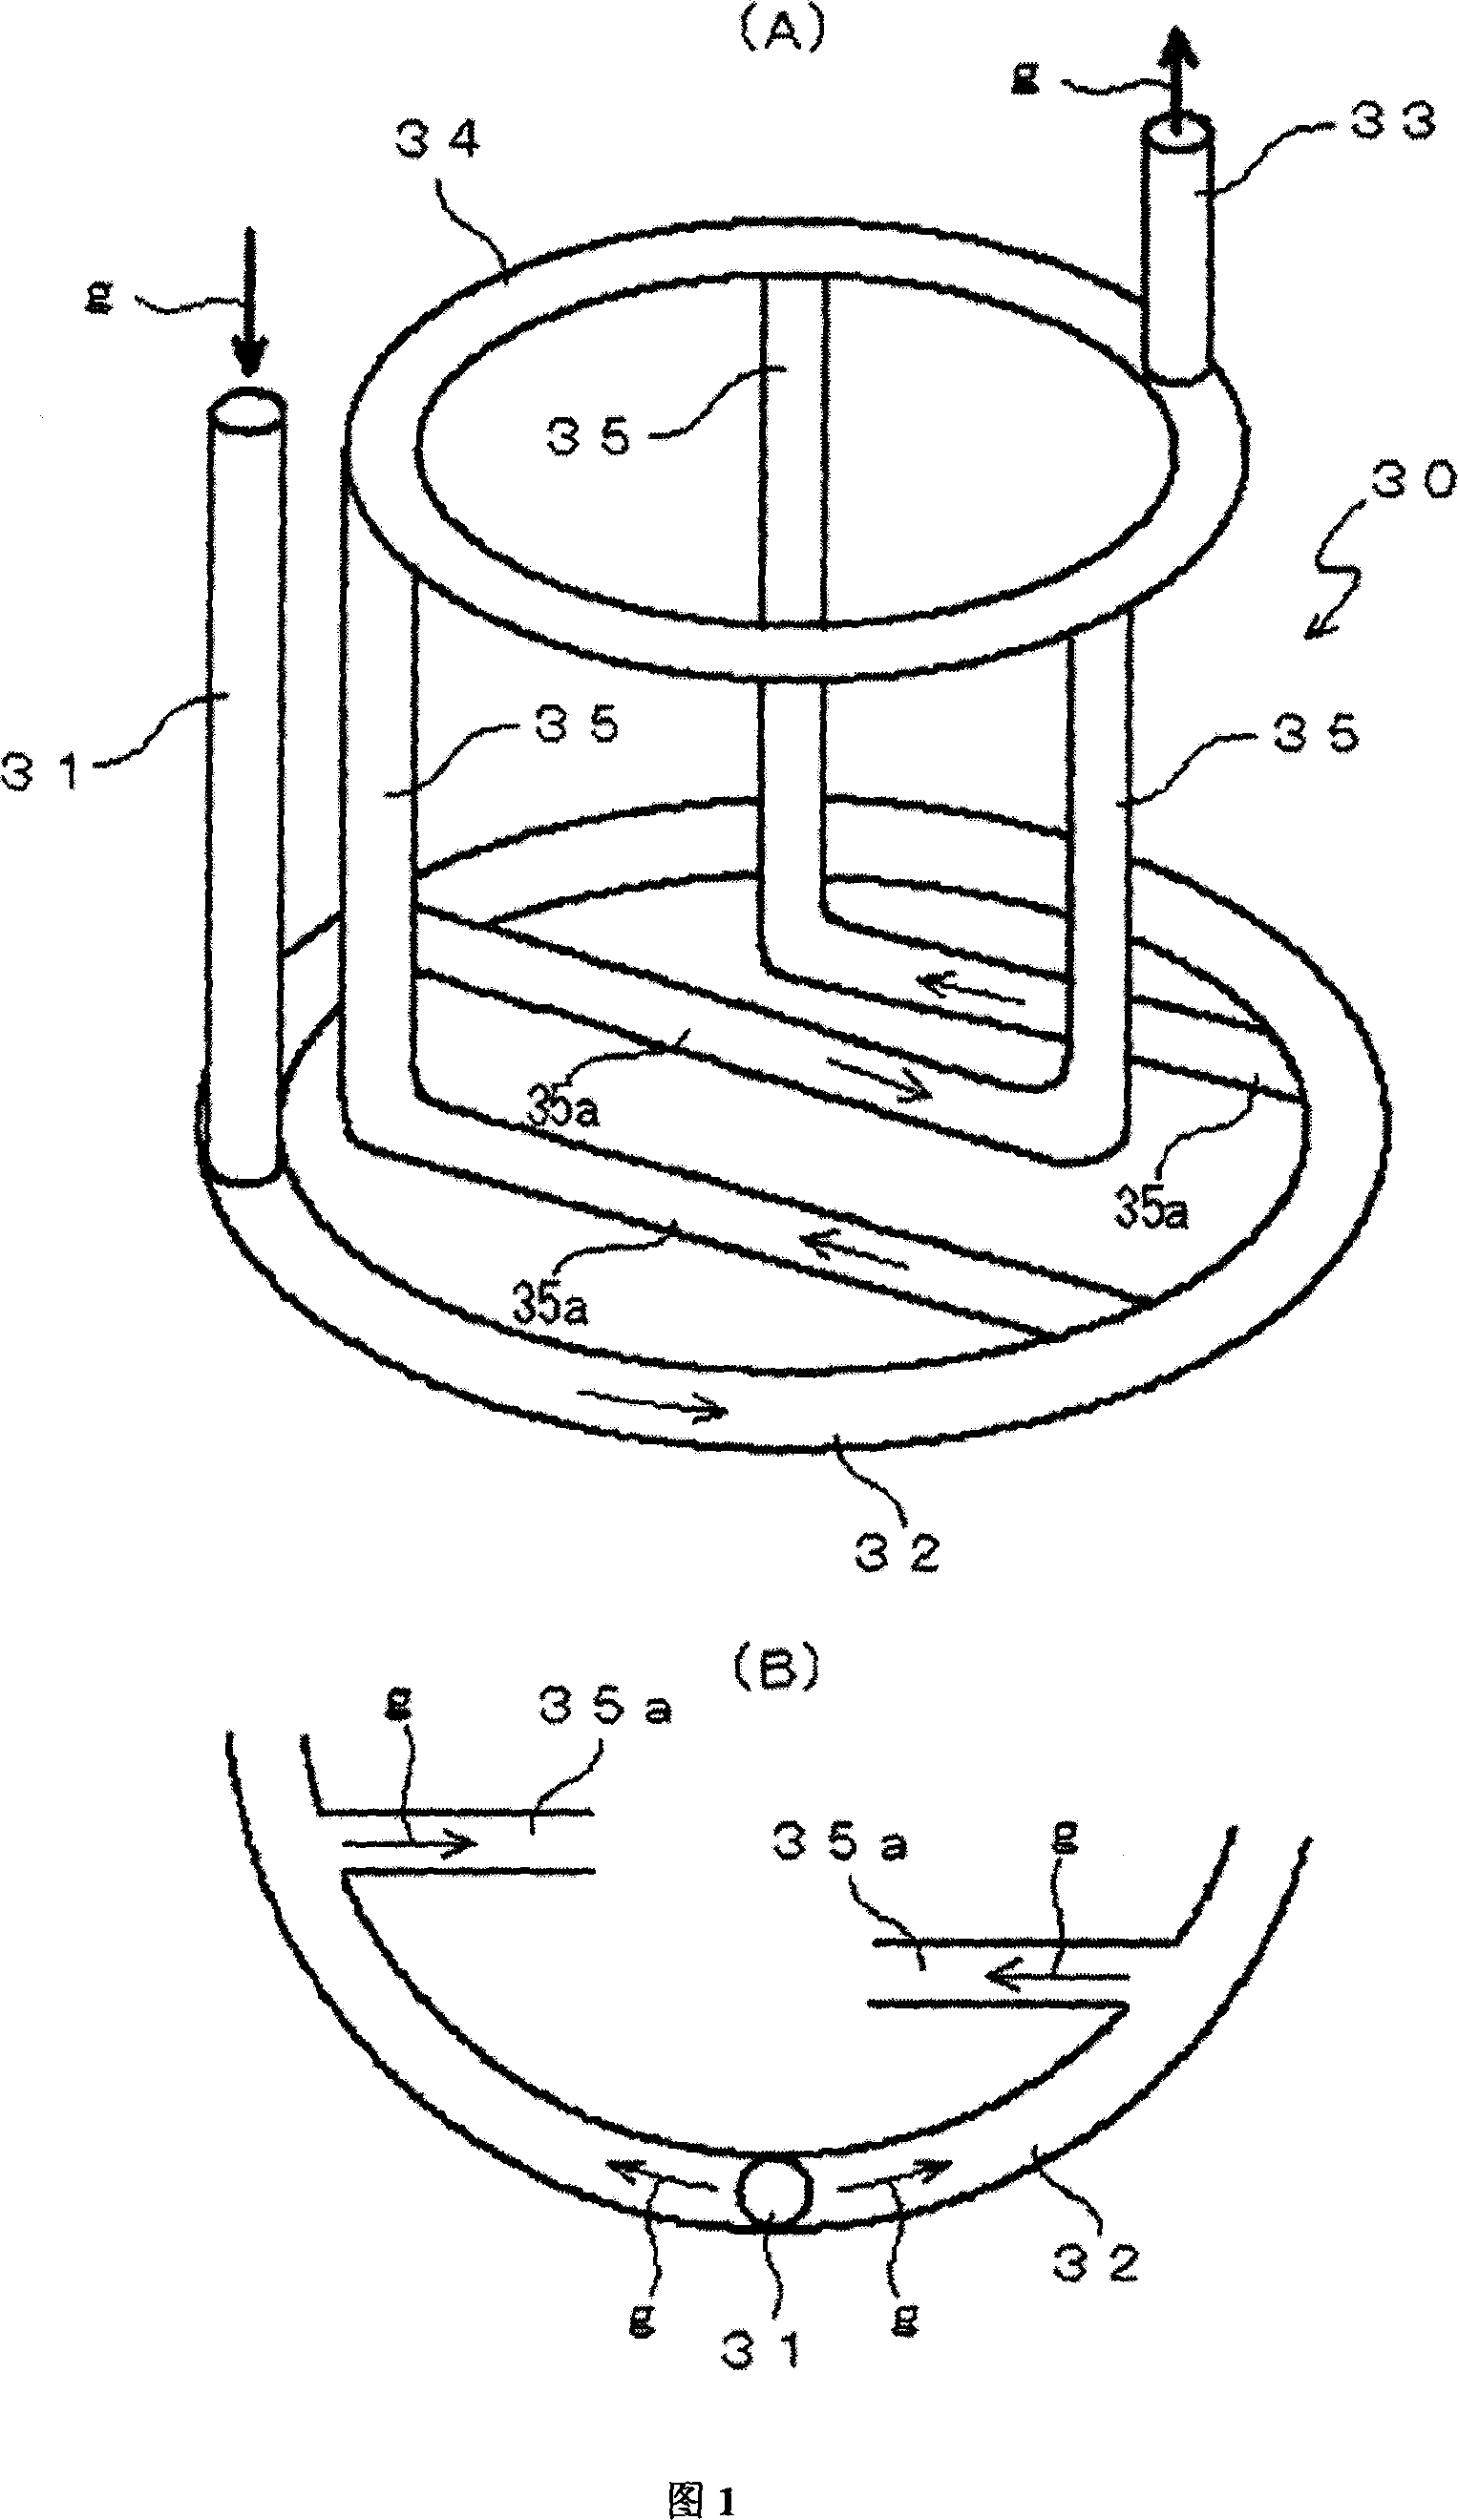 Substrate surface treating apparatus